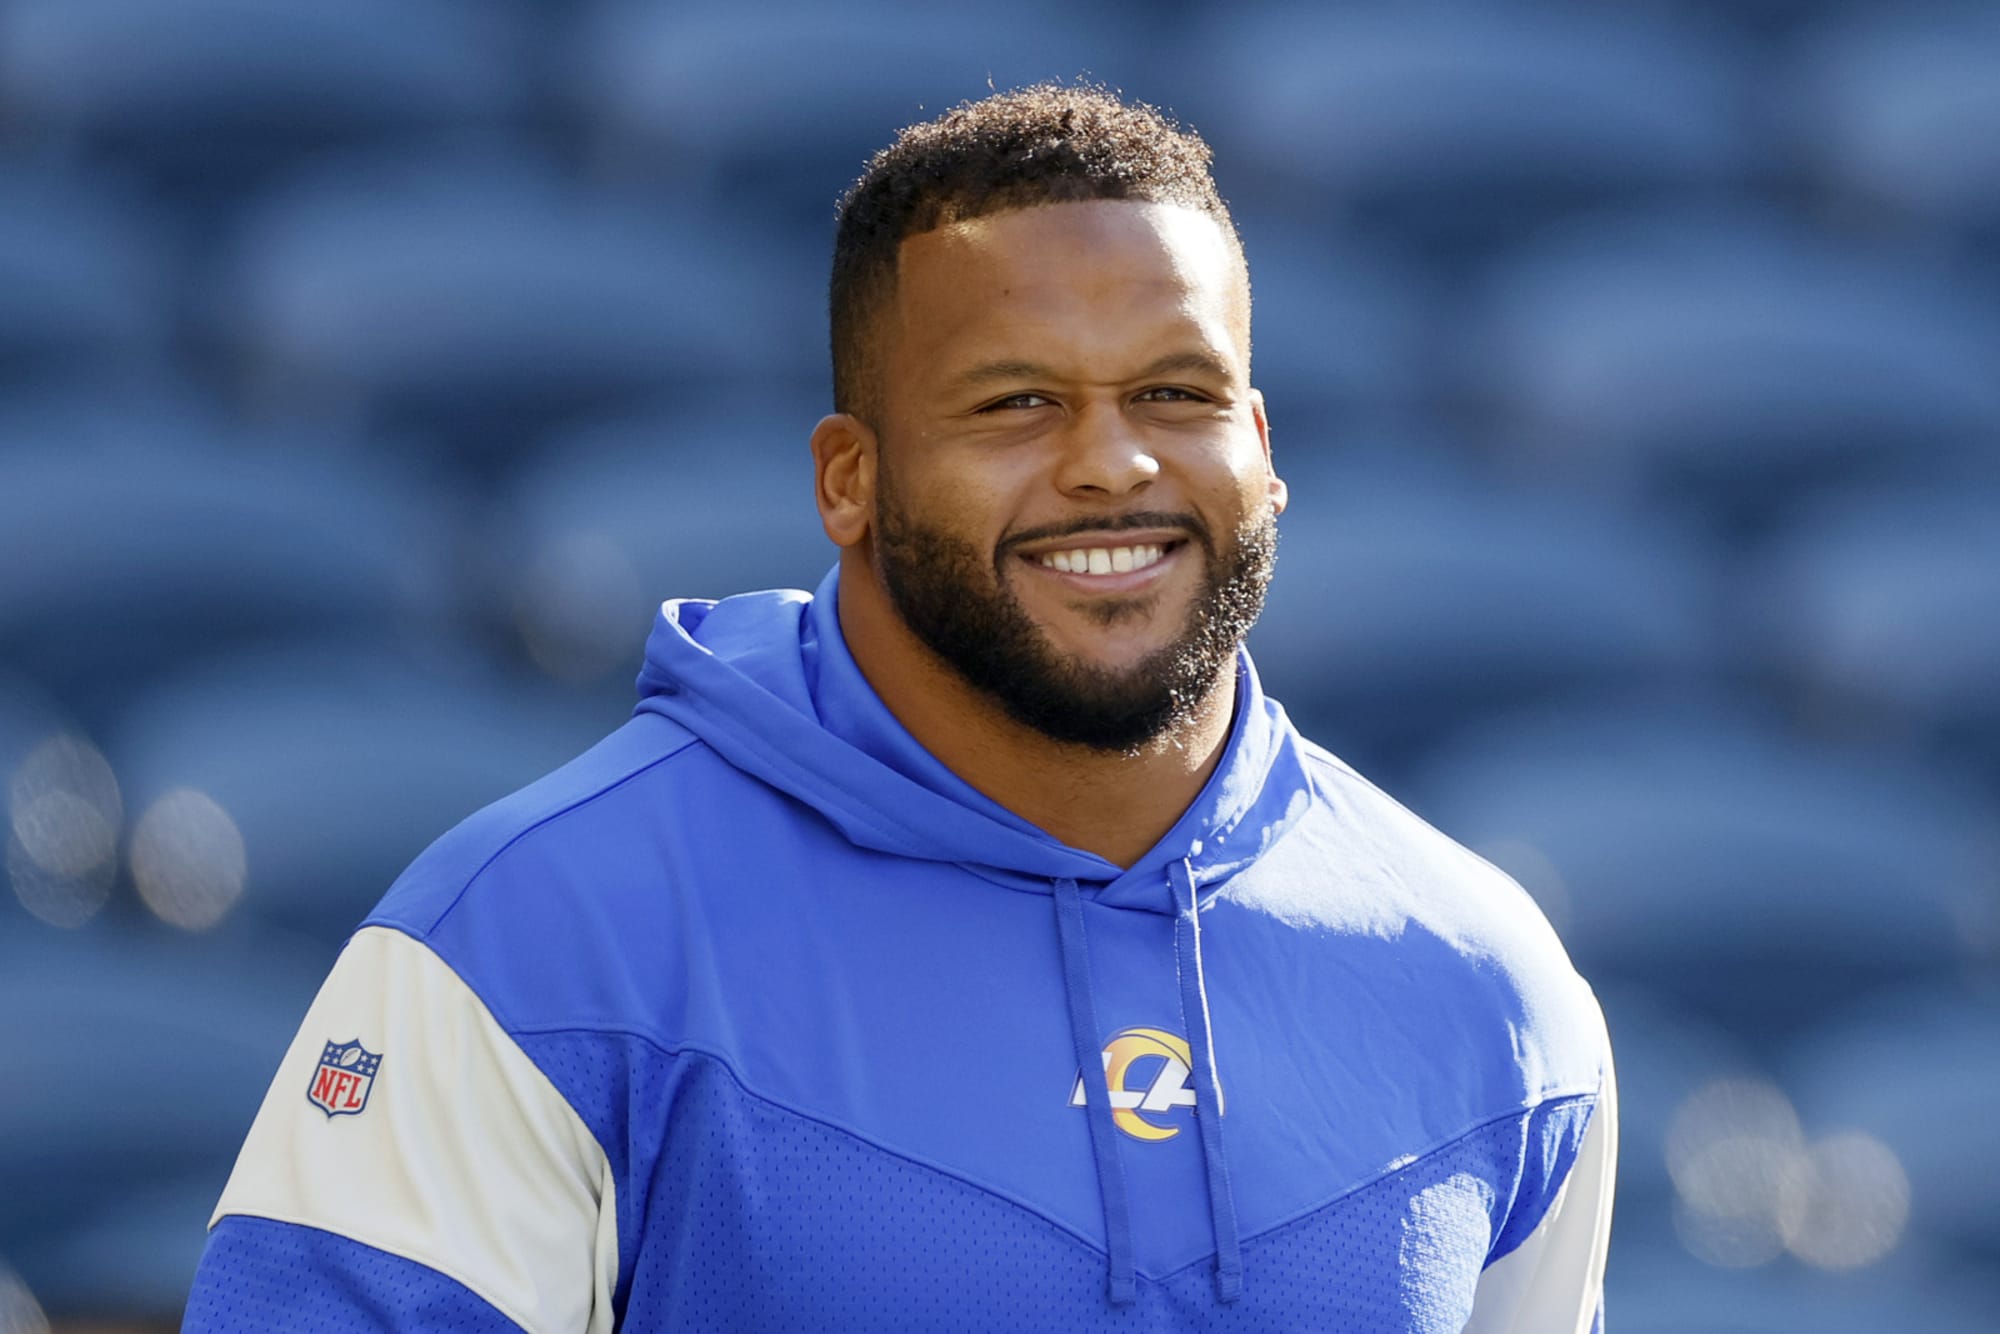 Kanye West is taking full credit for Aaron Donald’s record-breaking contract